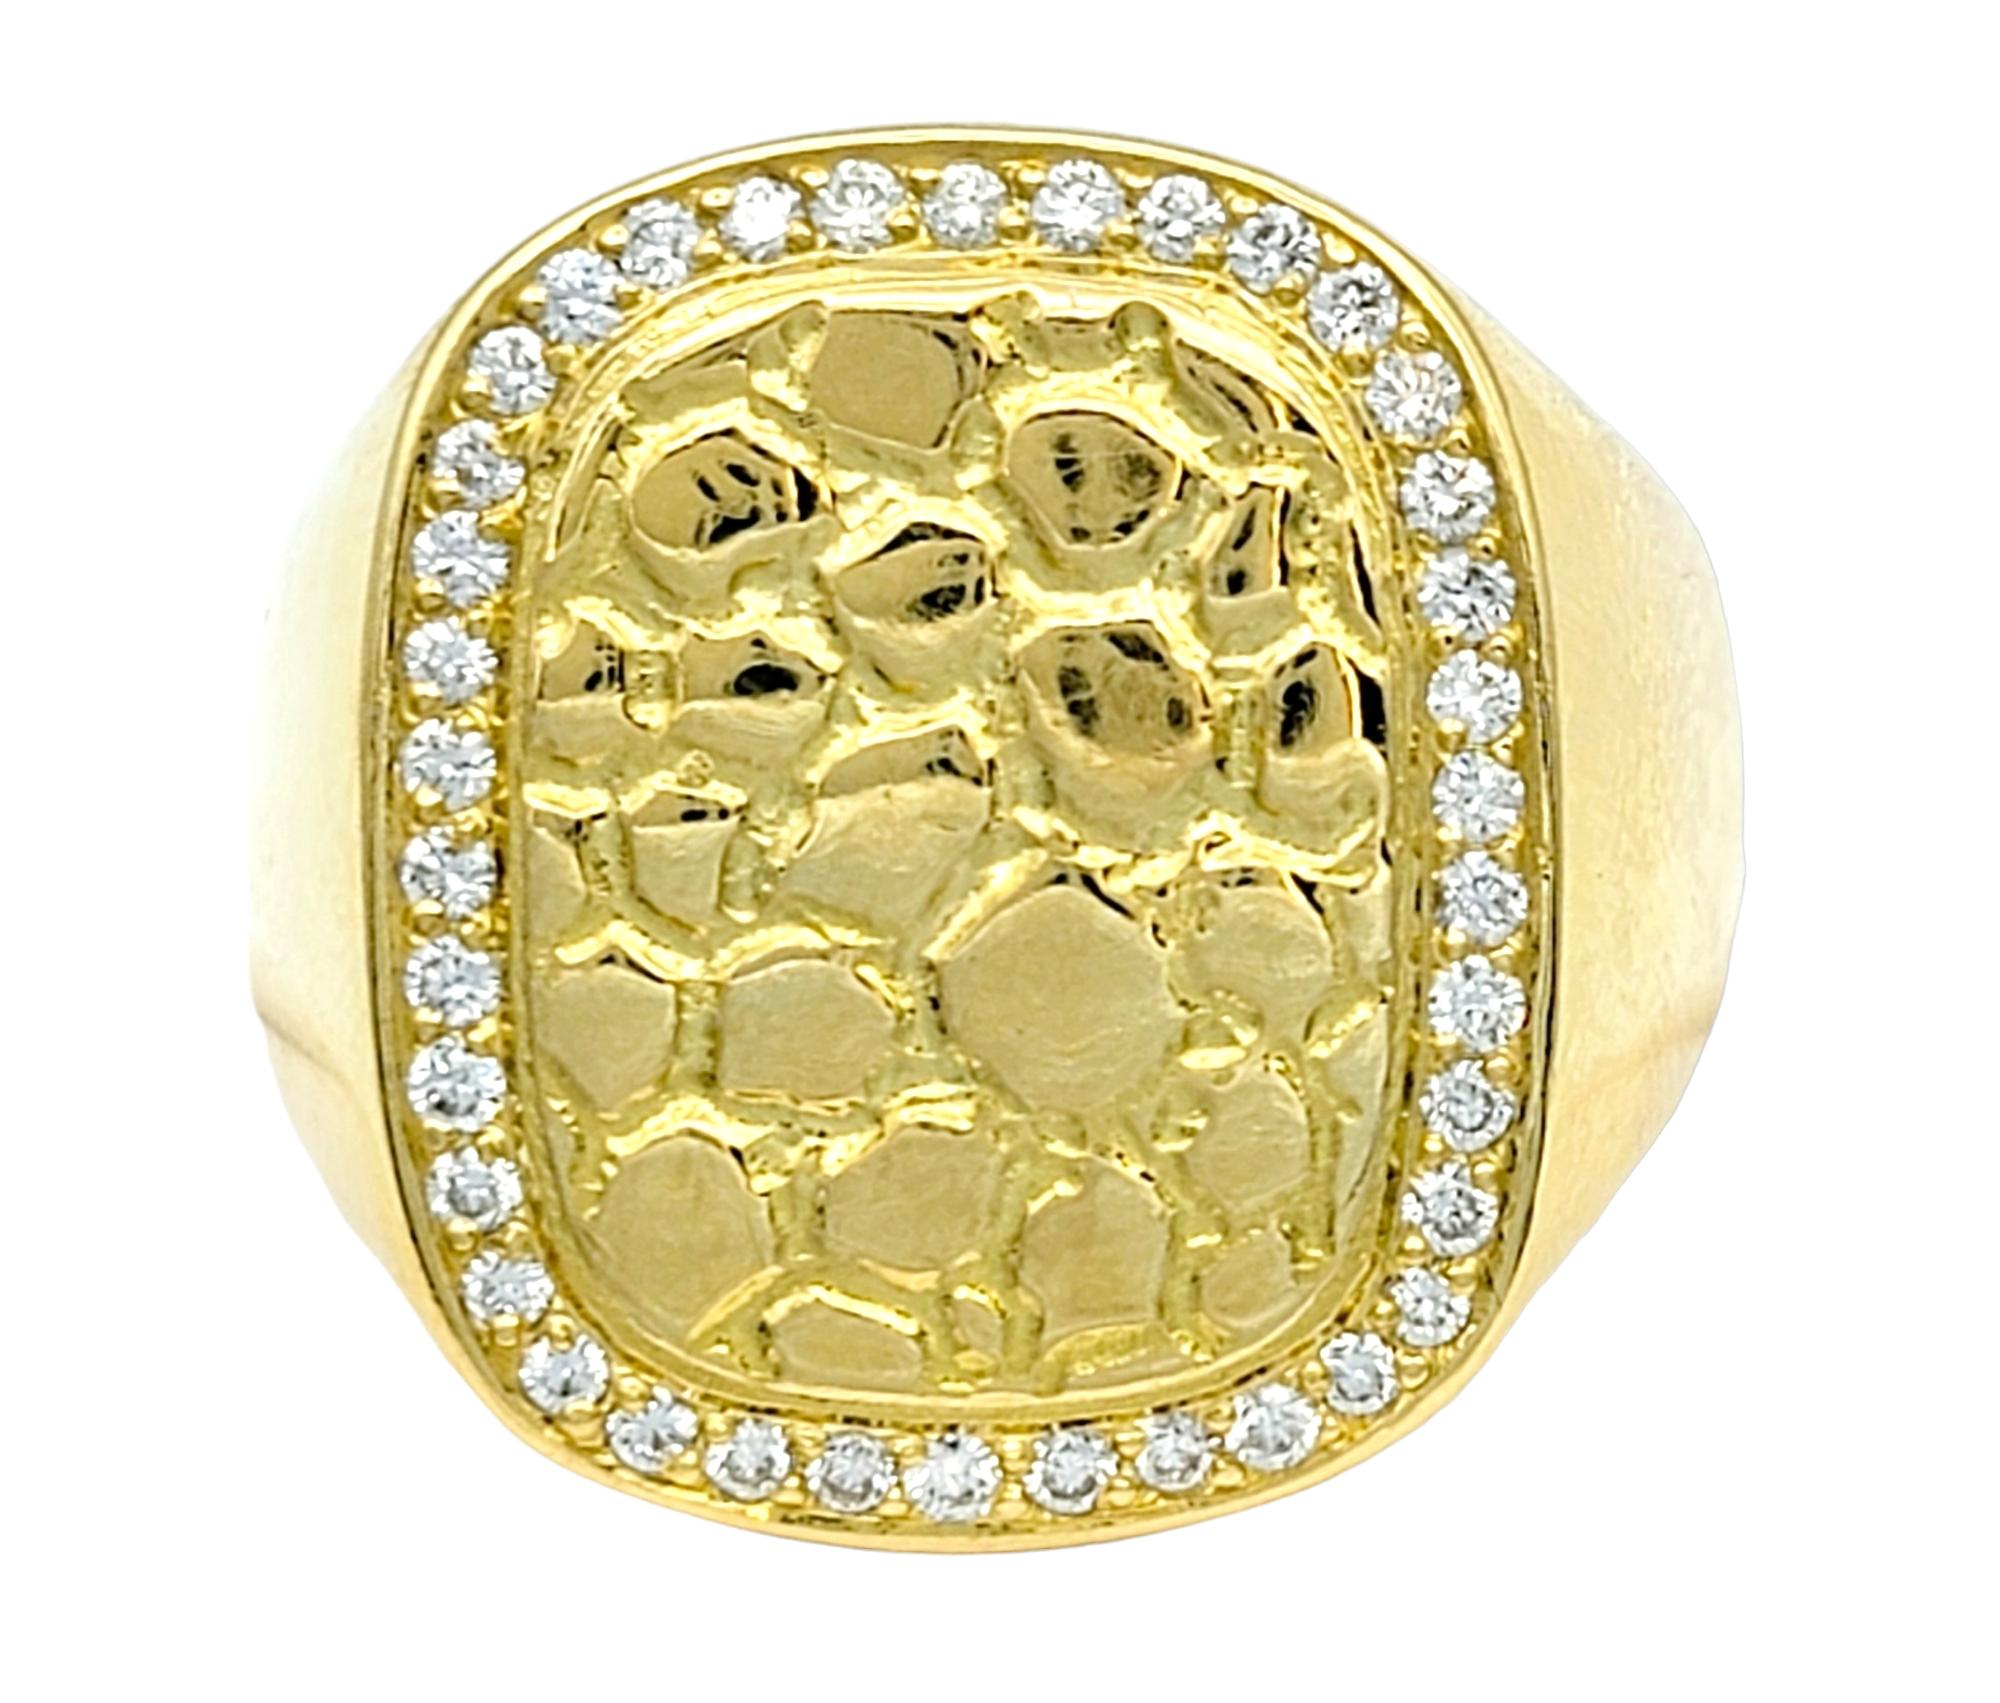 Ring Size: 10.75

This handsome men's ring, set in exquisite 18 karat yellow gold, is a true testament to sophistication and luxury. Its flat top design features a rounded rectangular-shaped ornament, meticulously crafted to resemble the intricate